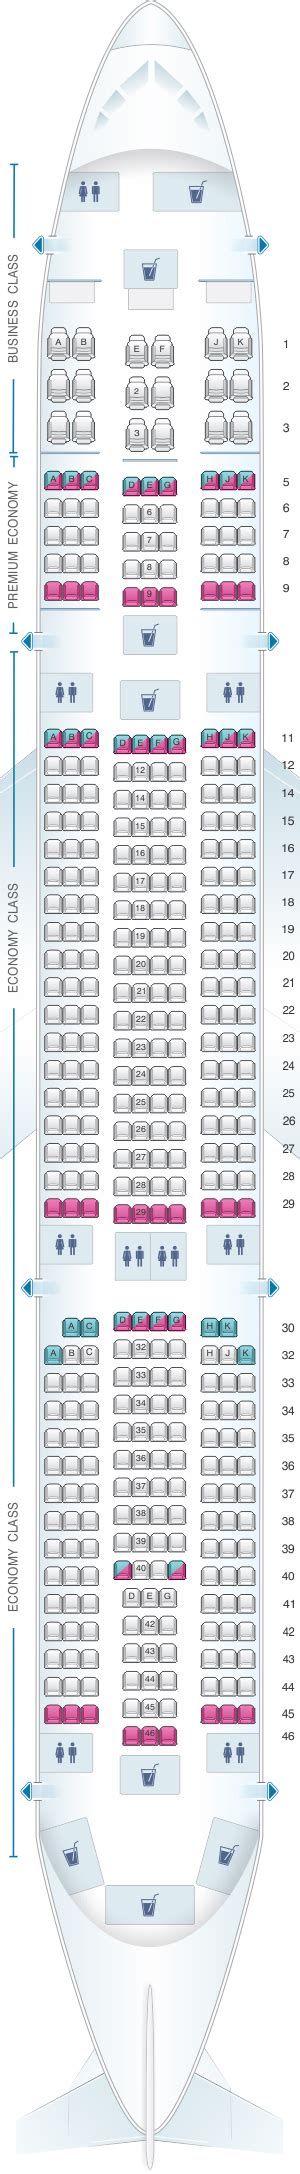 Airbus A350 900 Seat Map Air France Image To U